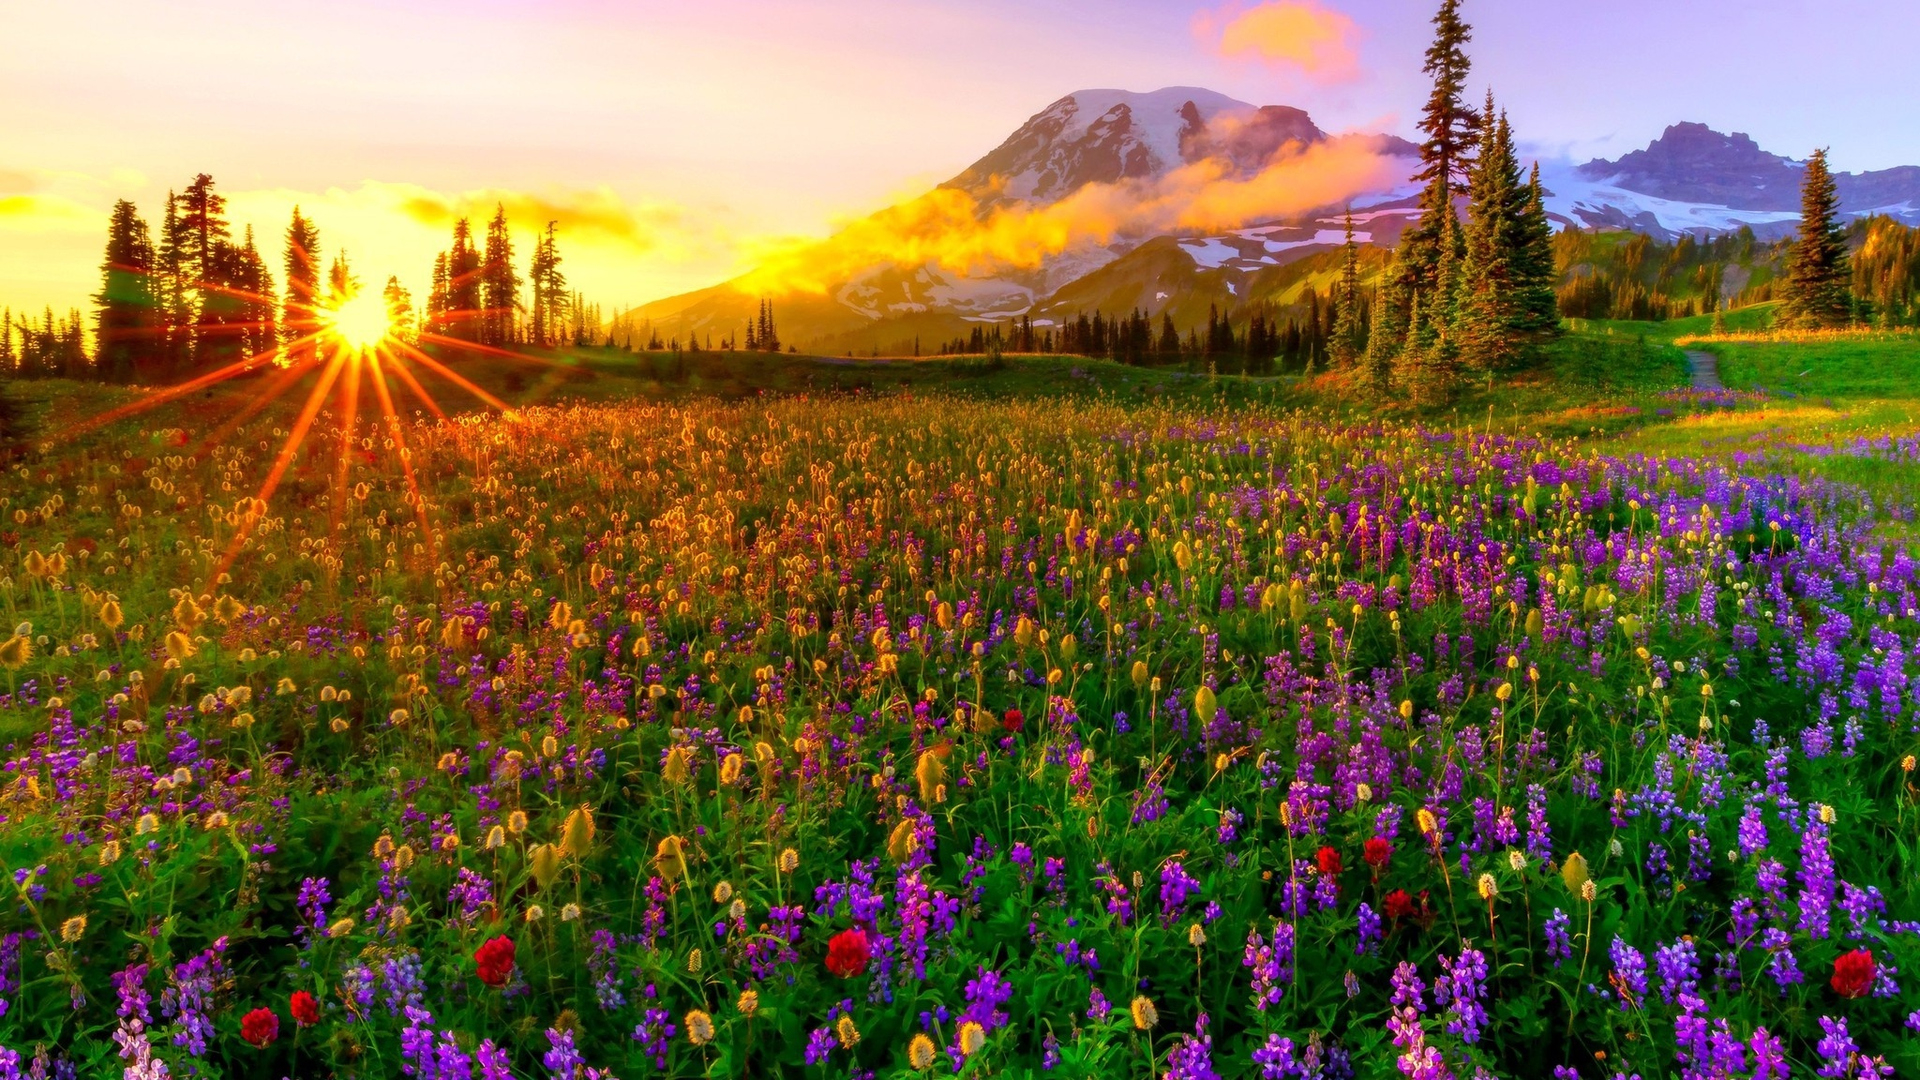 1920x1080 Download Wildflowers, Flowers, Trees, Mountains, Light Wallpaper in Resoluti